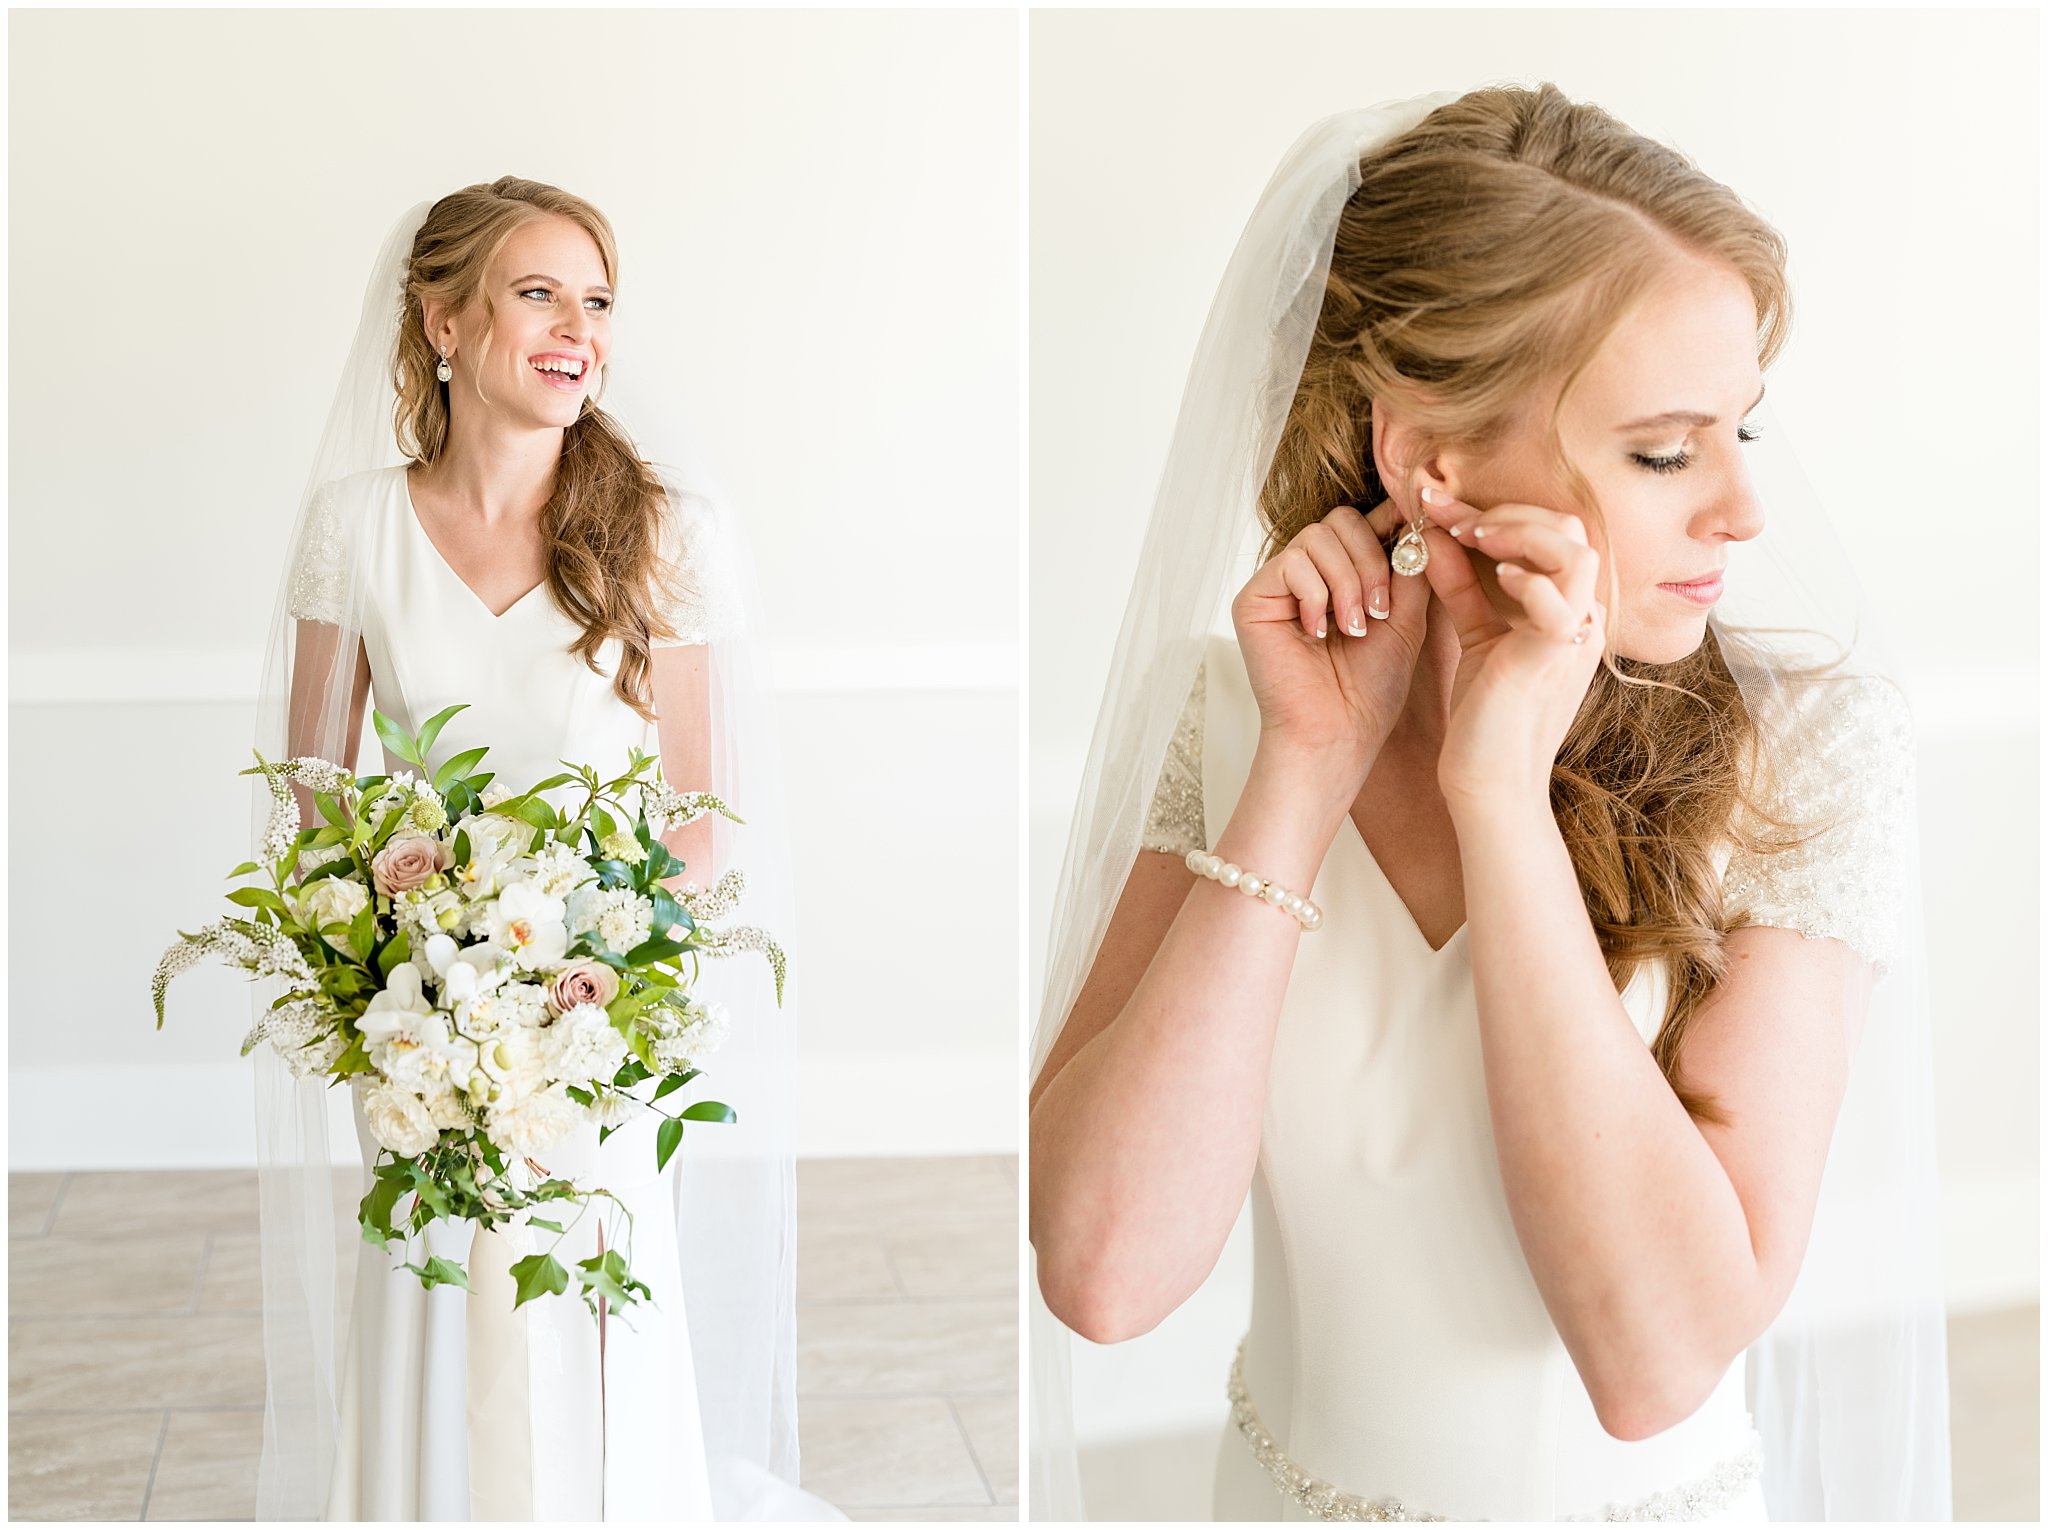 Bright and joyful laughing bridal shot and adjusting earring | Talia Event Center